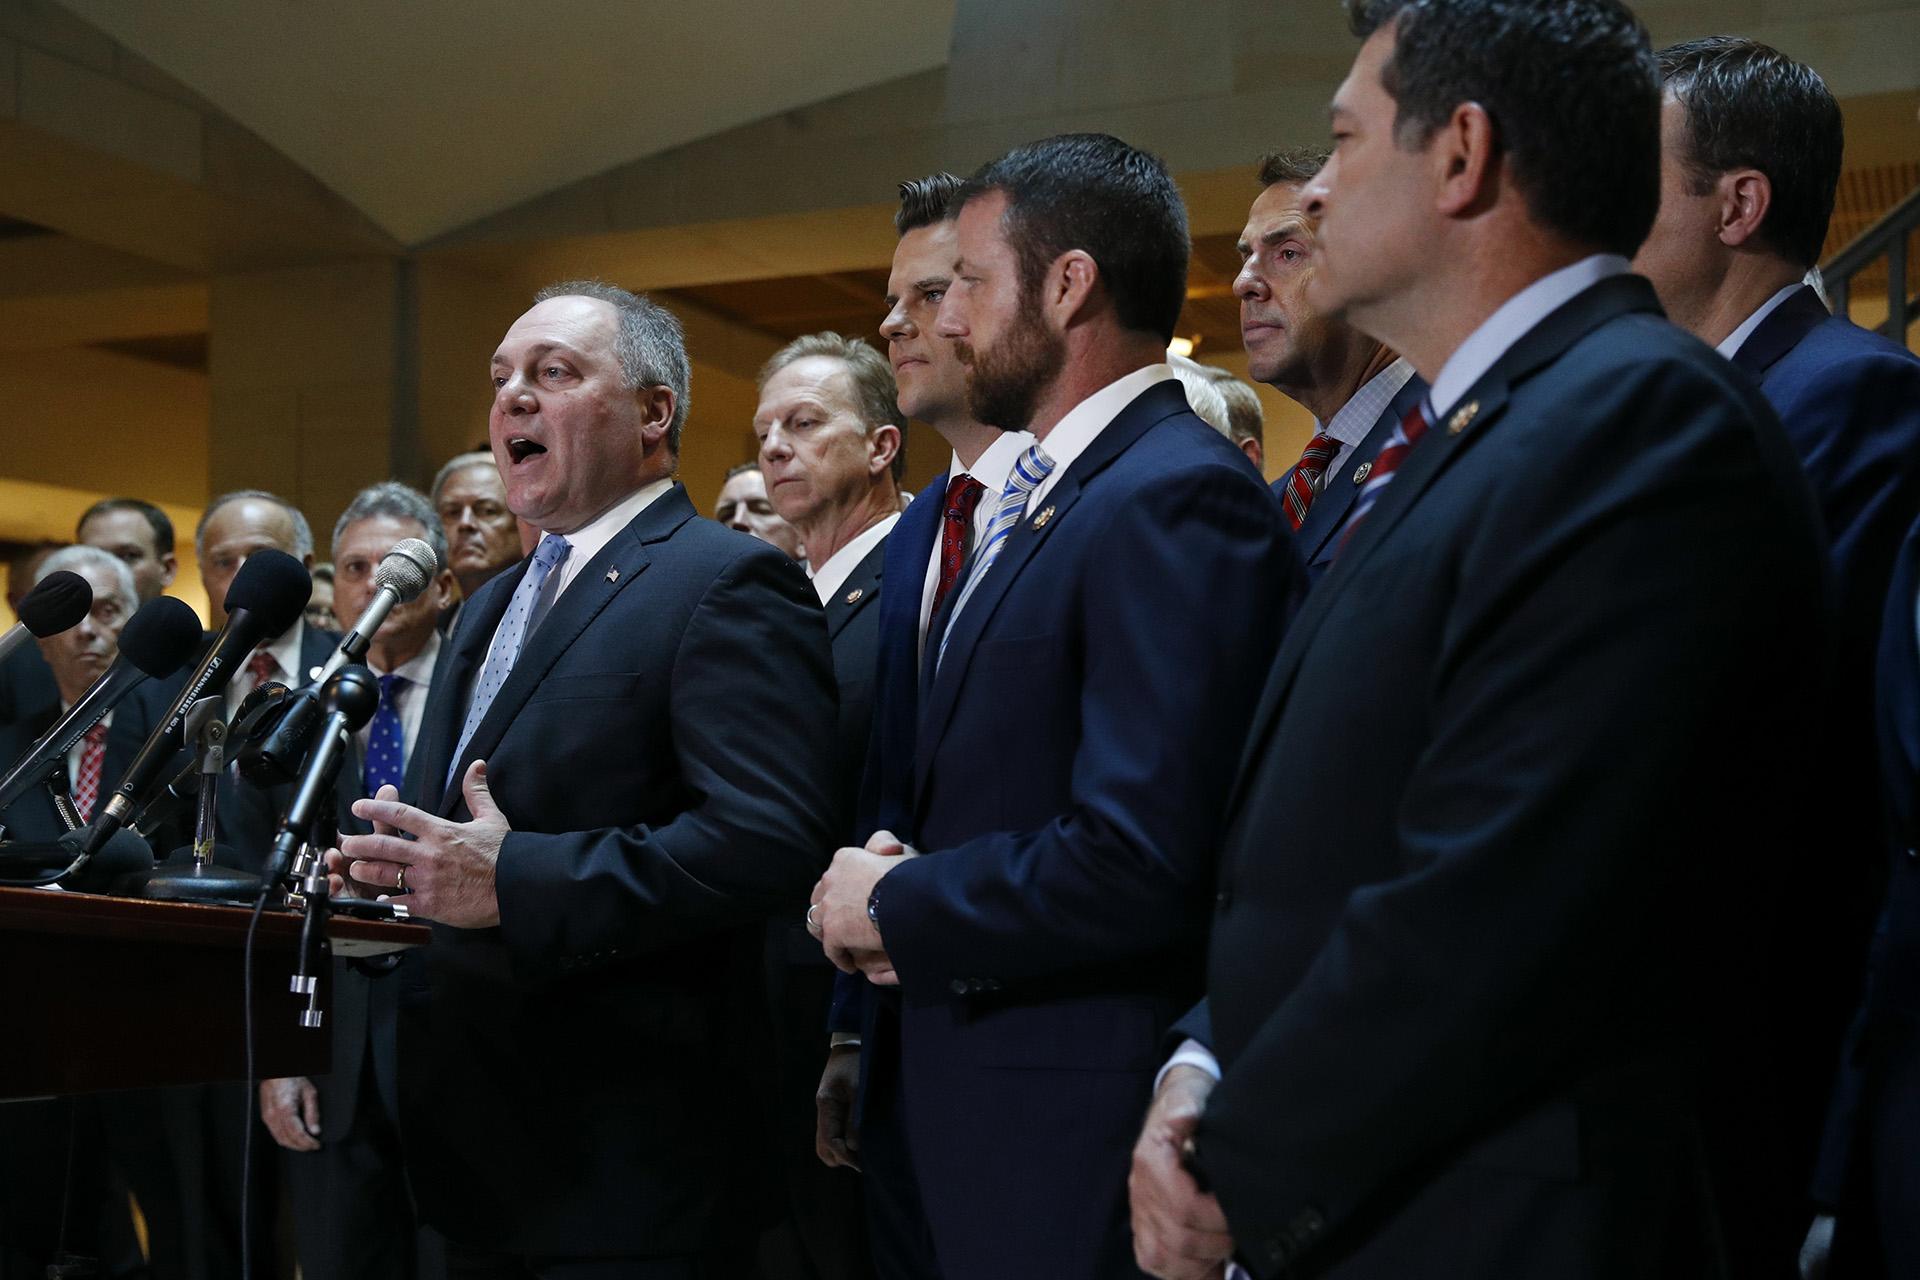 House Minority Whip Steve Scalise, R-La., left, speaks at a news conference in front of House Republicans after Deputy Assistant Secretary of Defense Laura Cooper arrived for a closed door meeting to testify as part of the House impeachment inquiry into President Donald Trump, Wednesday, Oct. 23, 2019, on Capitol Hill in Washington. (AP Photo / Patrick Semansky)